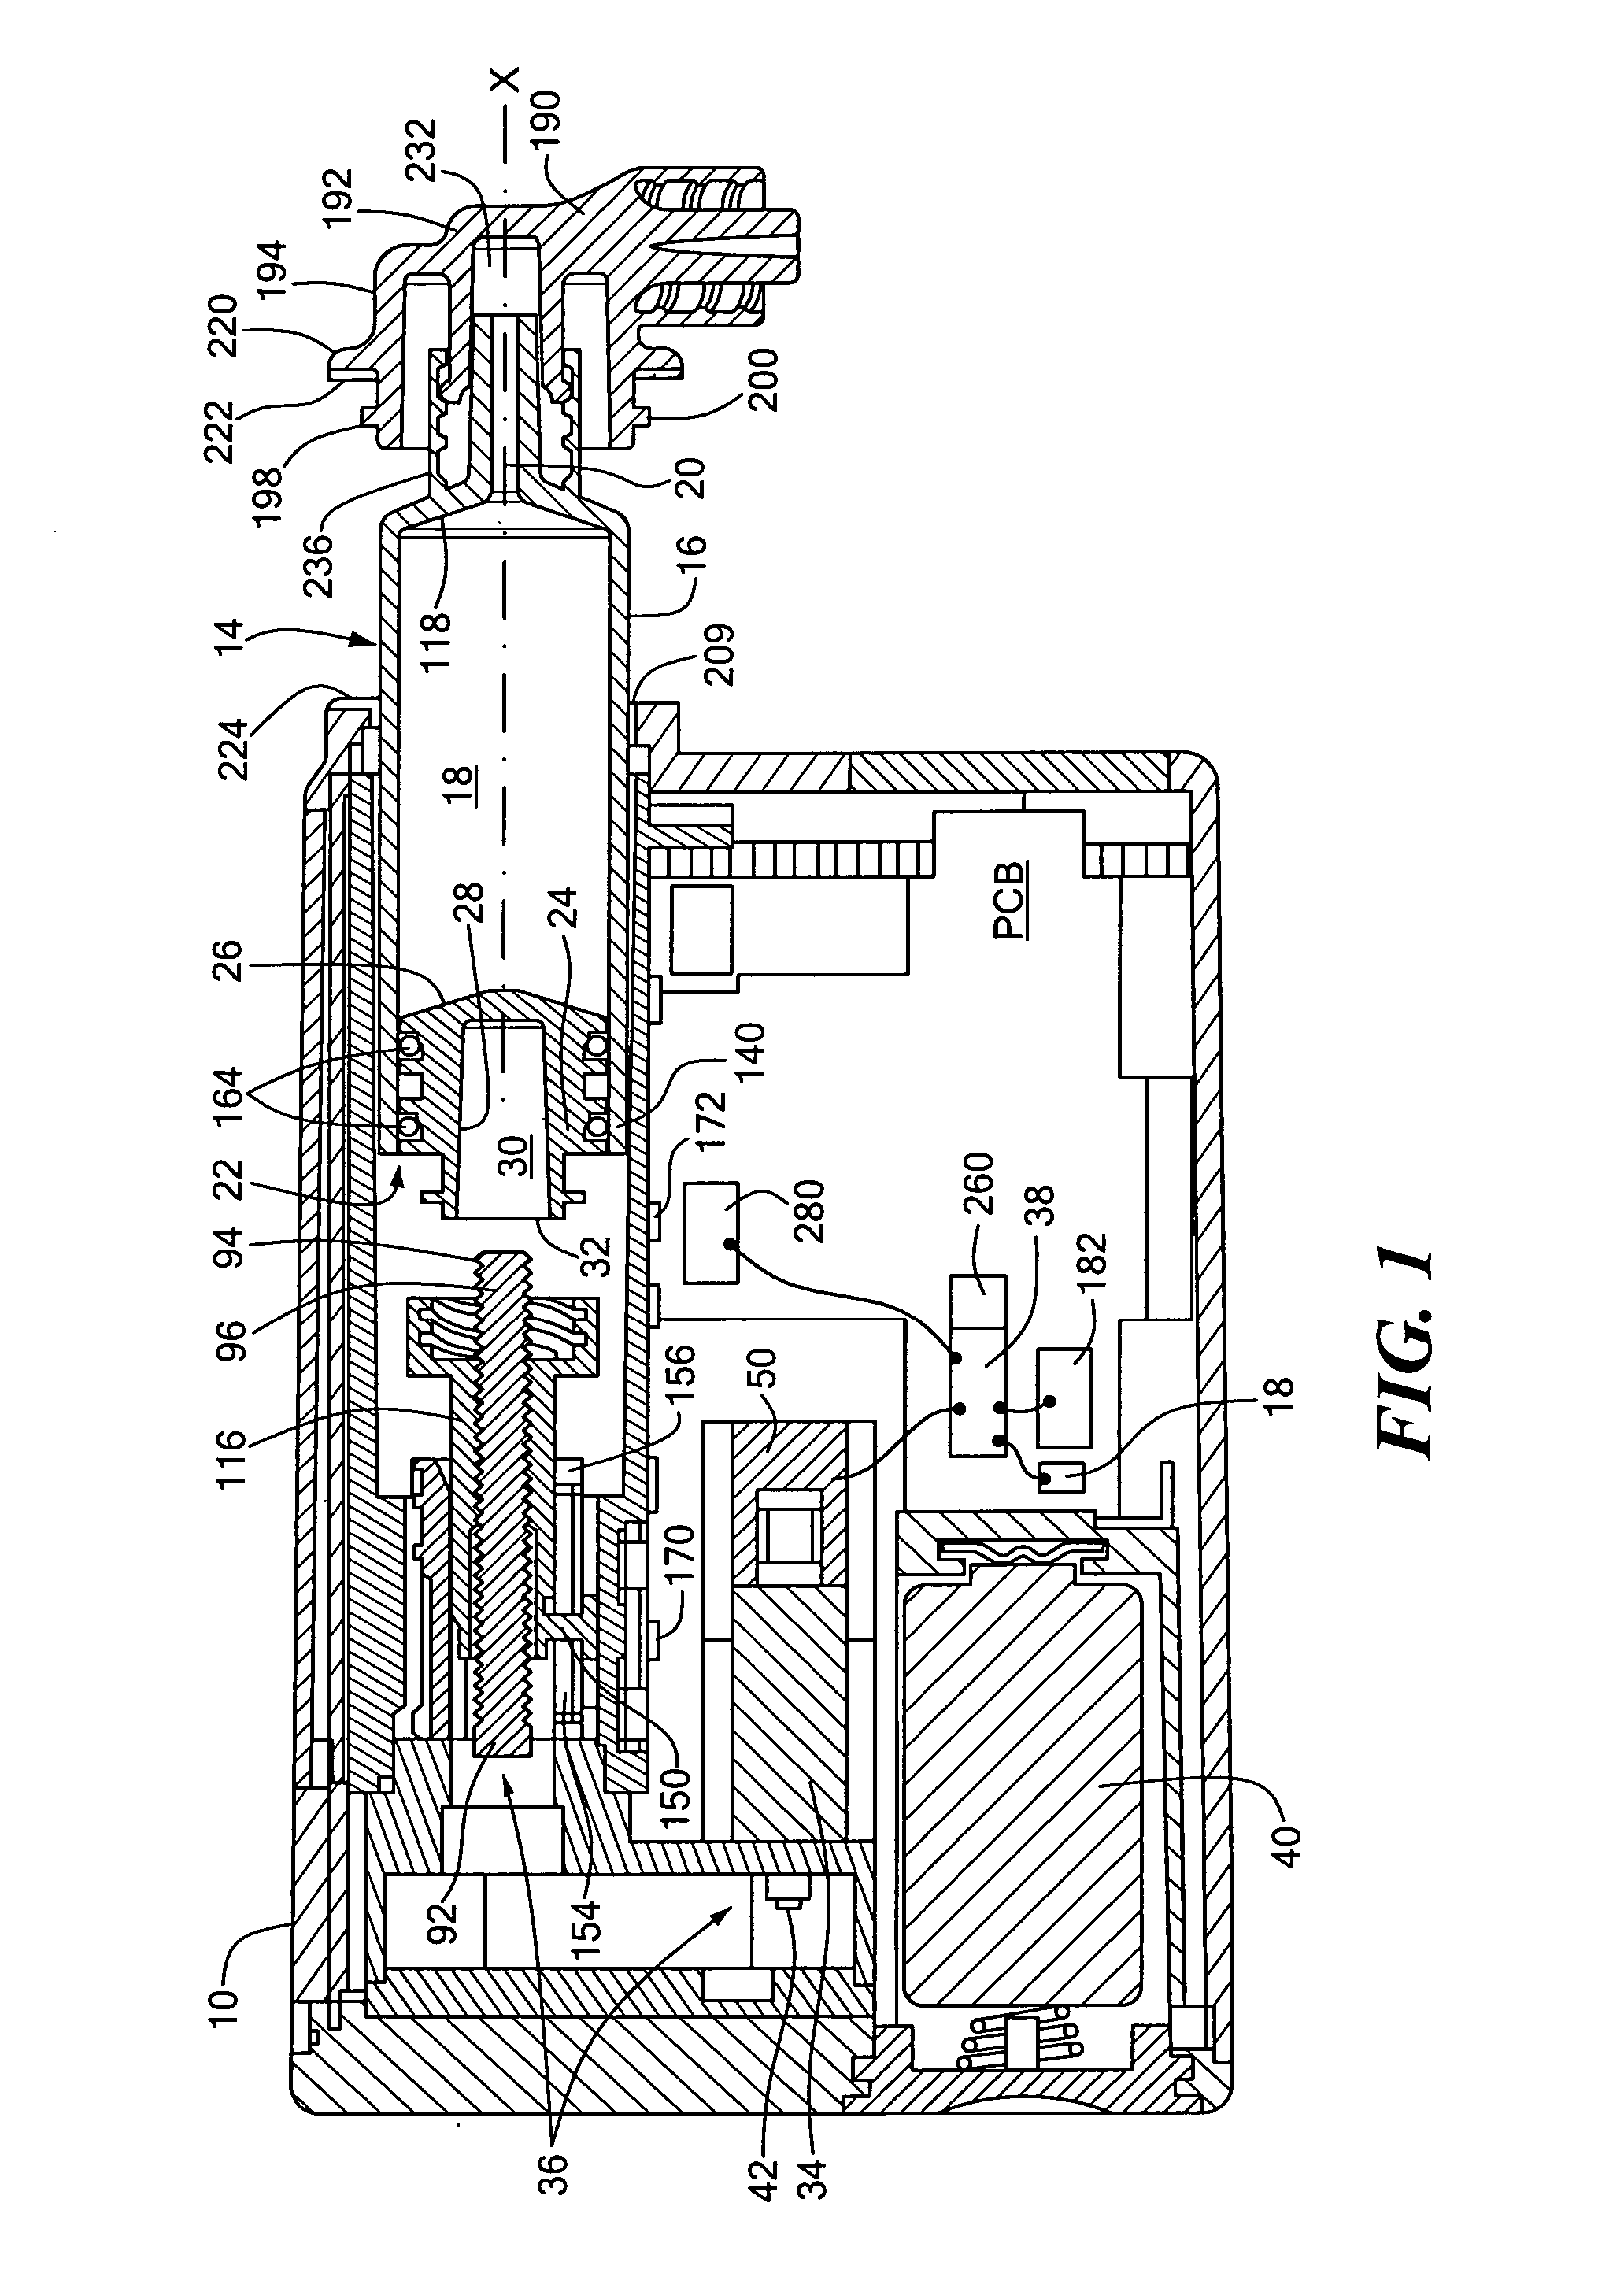 Coupling system for an infusion pump